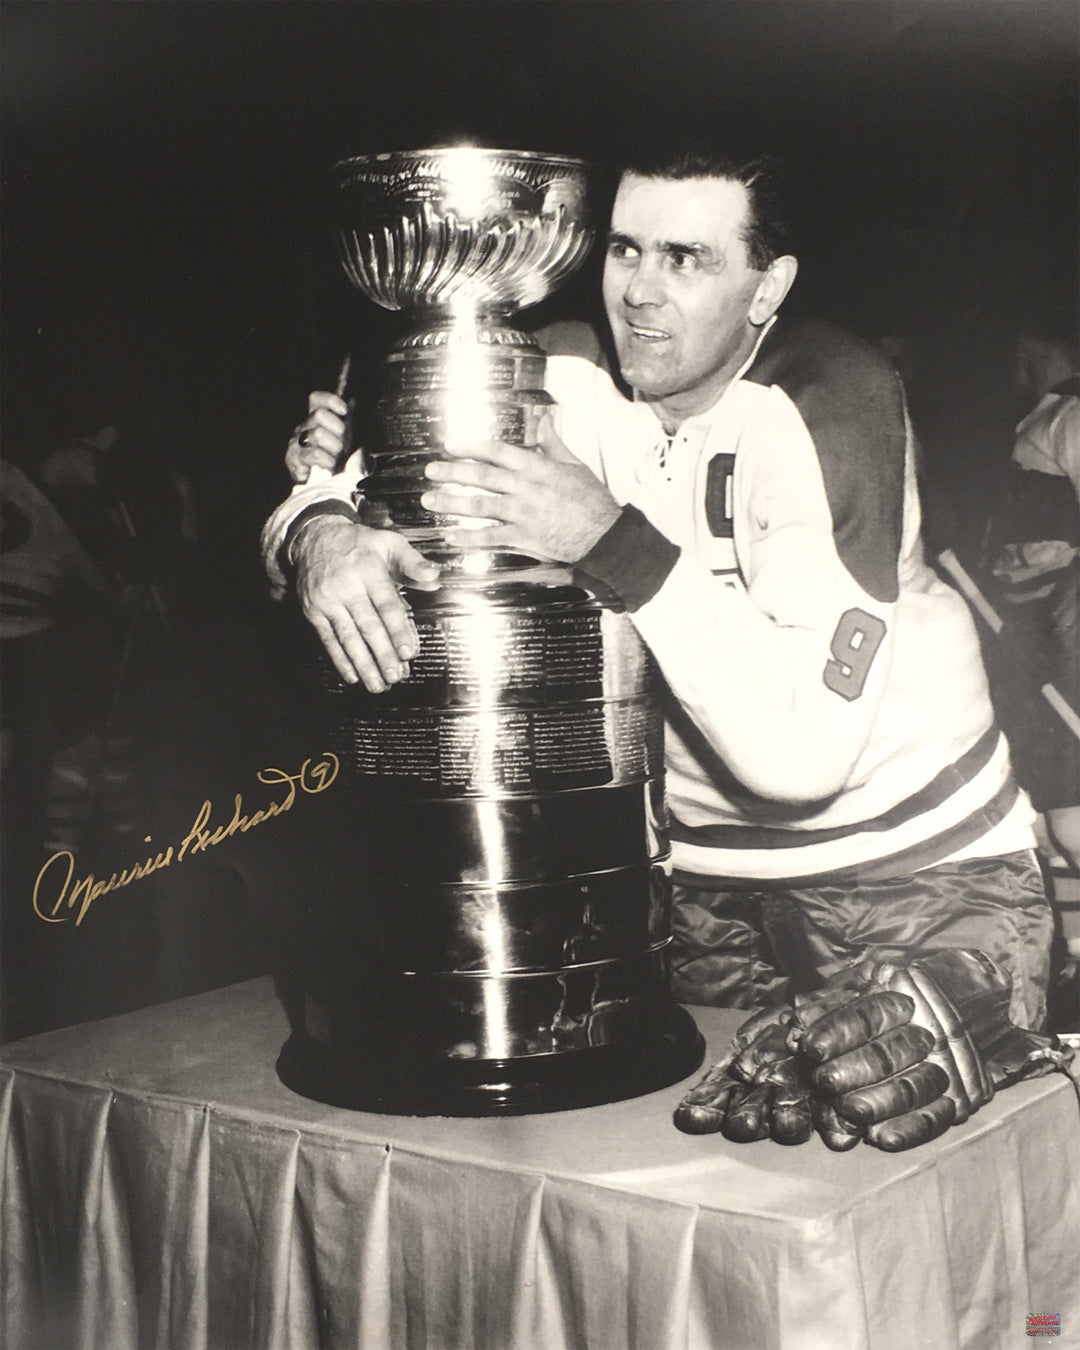 Autographed Maurice Richard Stanley Cup 20X24 Photo - Montreal Canadiens, Montreal Canadiens, NHL, Hockey, Autographed, Signed, AAHPH31568